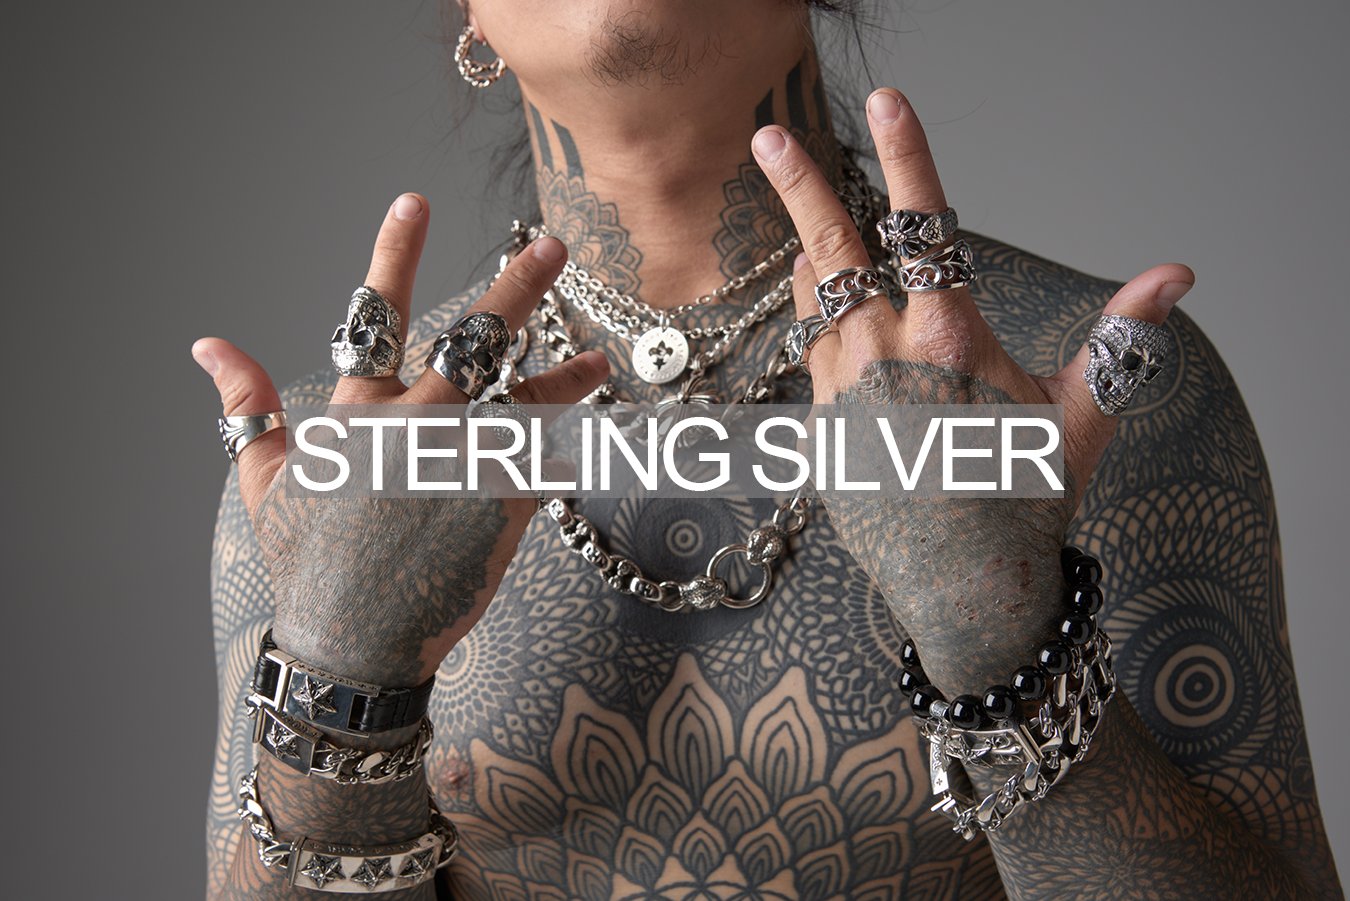 STERRLING SILVER